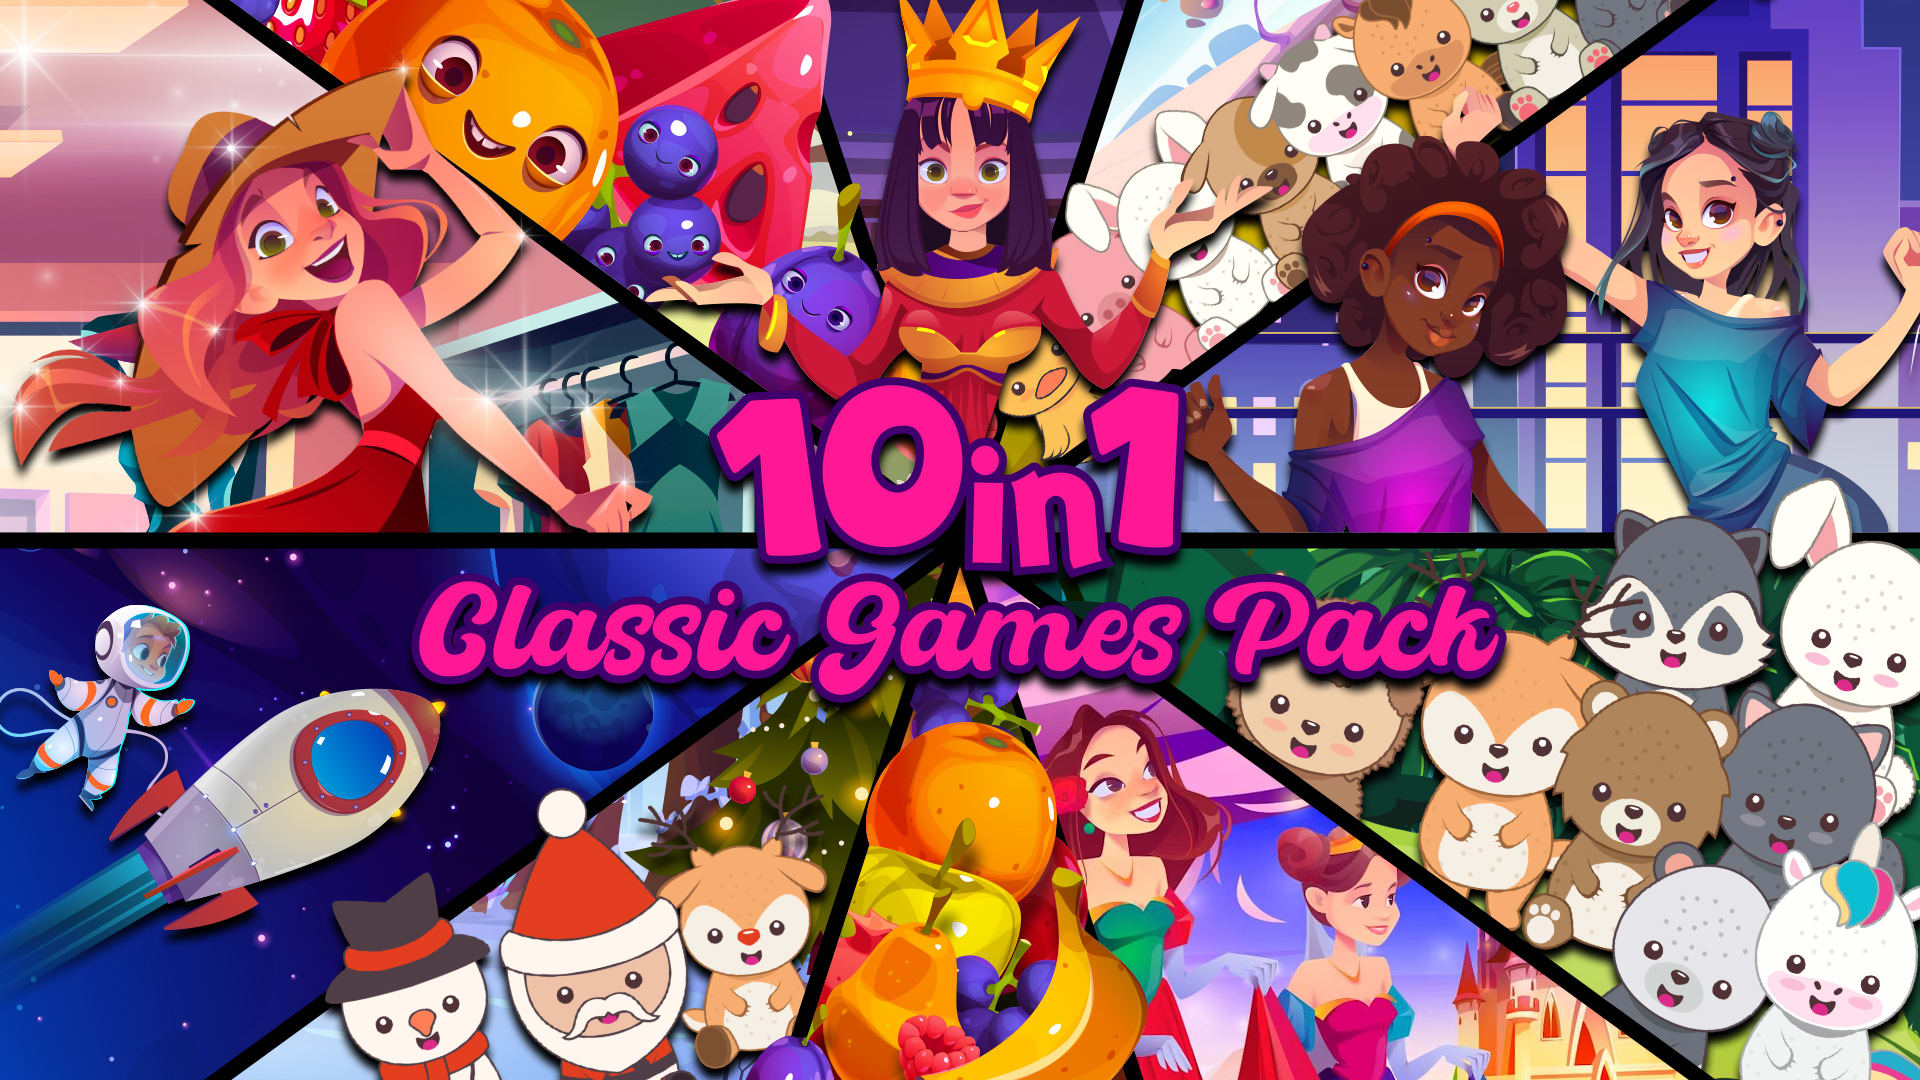 10 in 1 Classic Games Pack